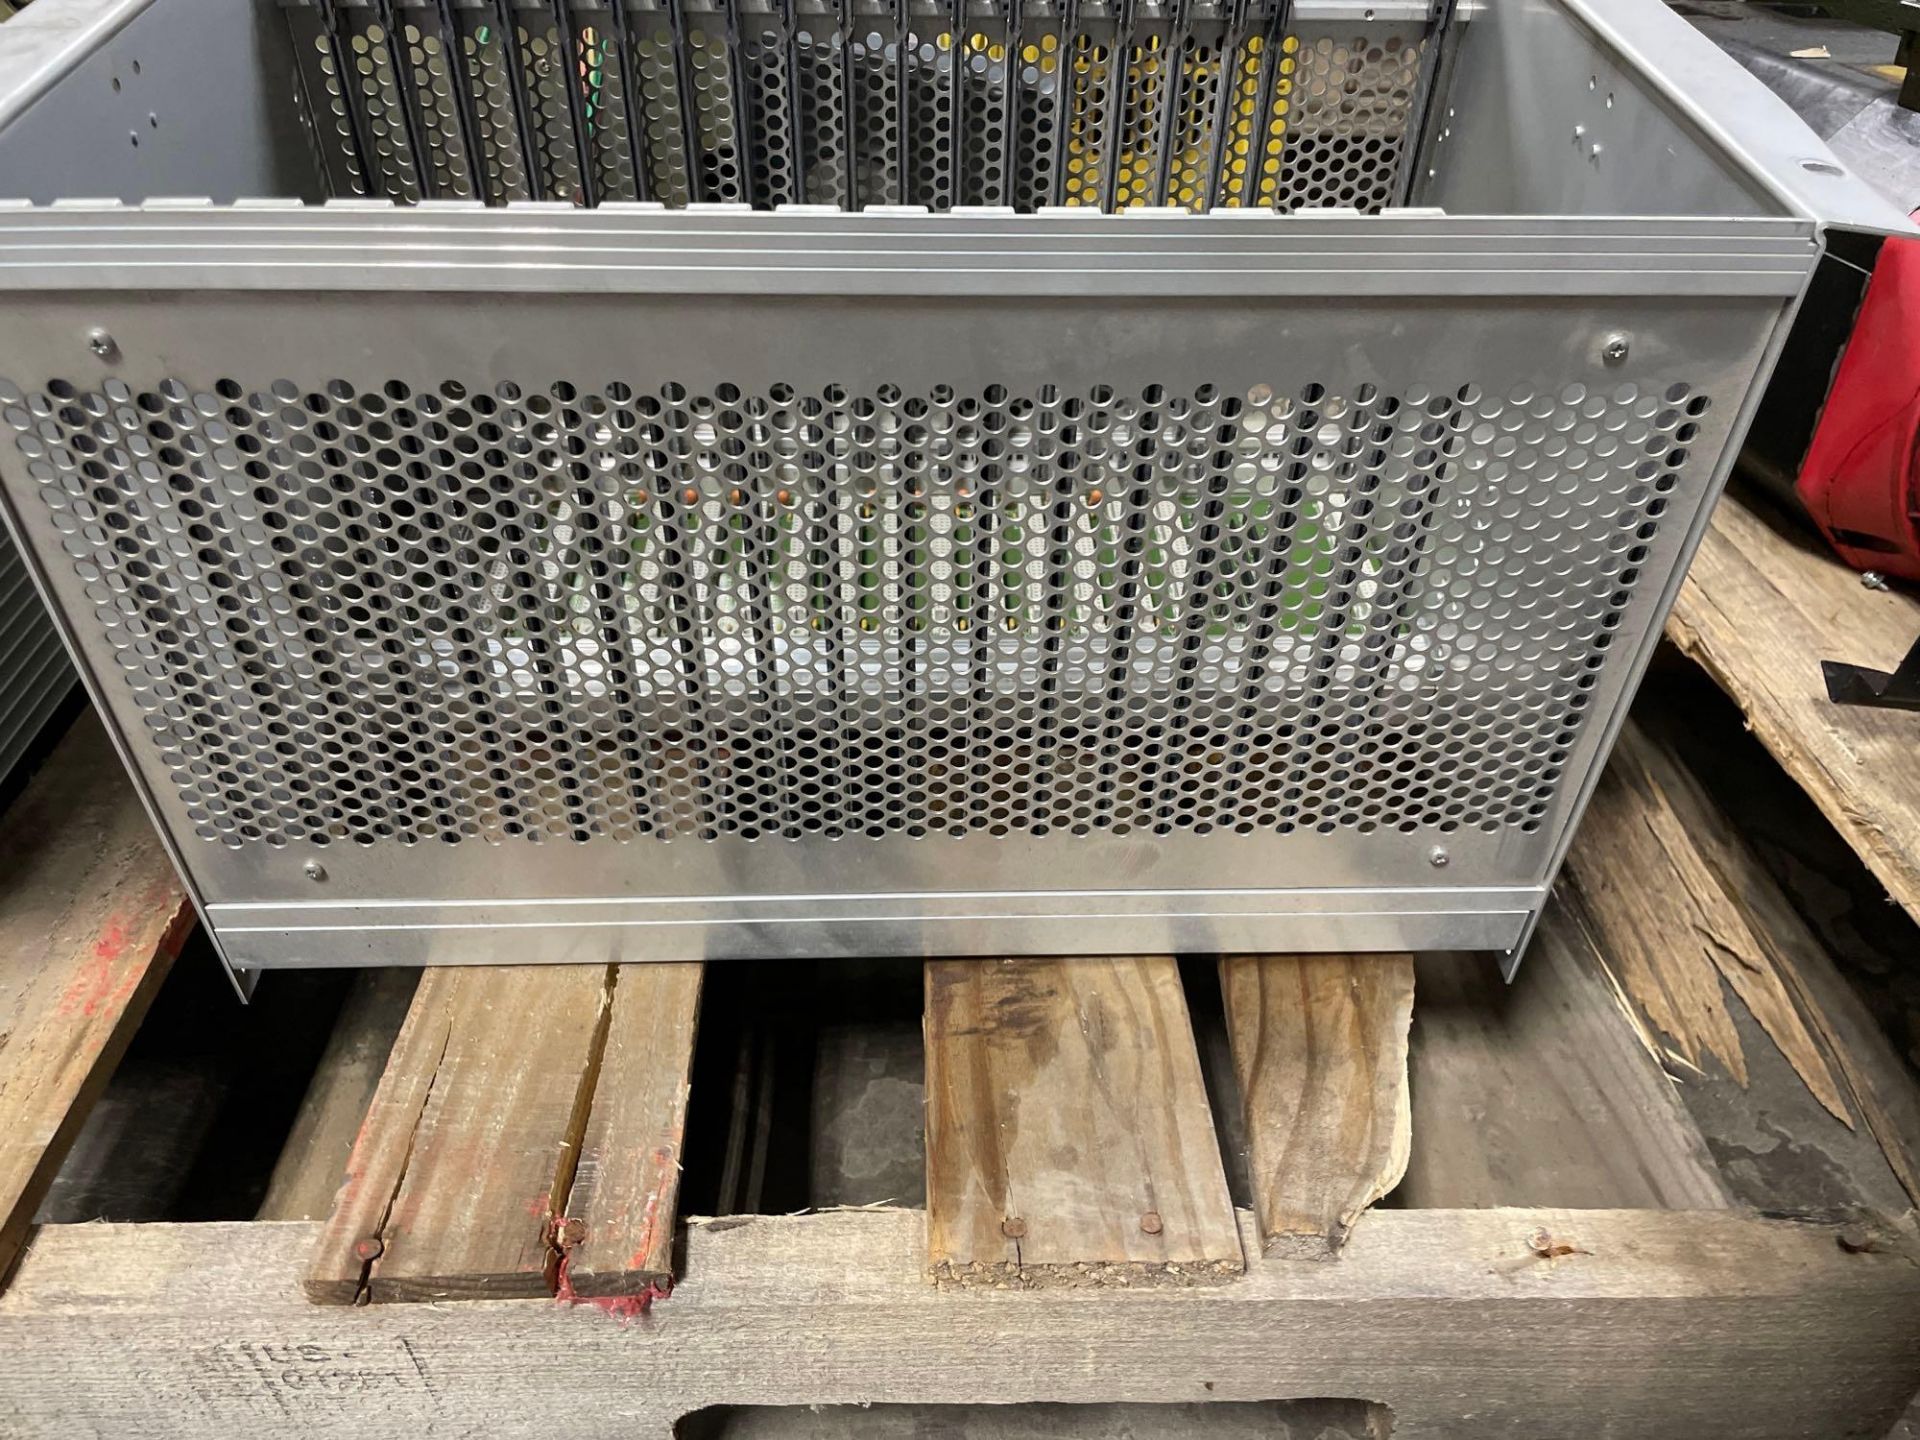 Pallet of electrical components - Image 8 of 14